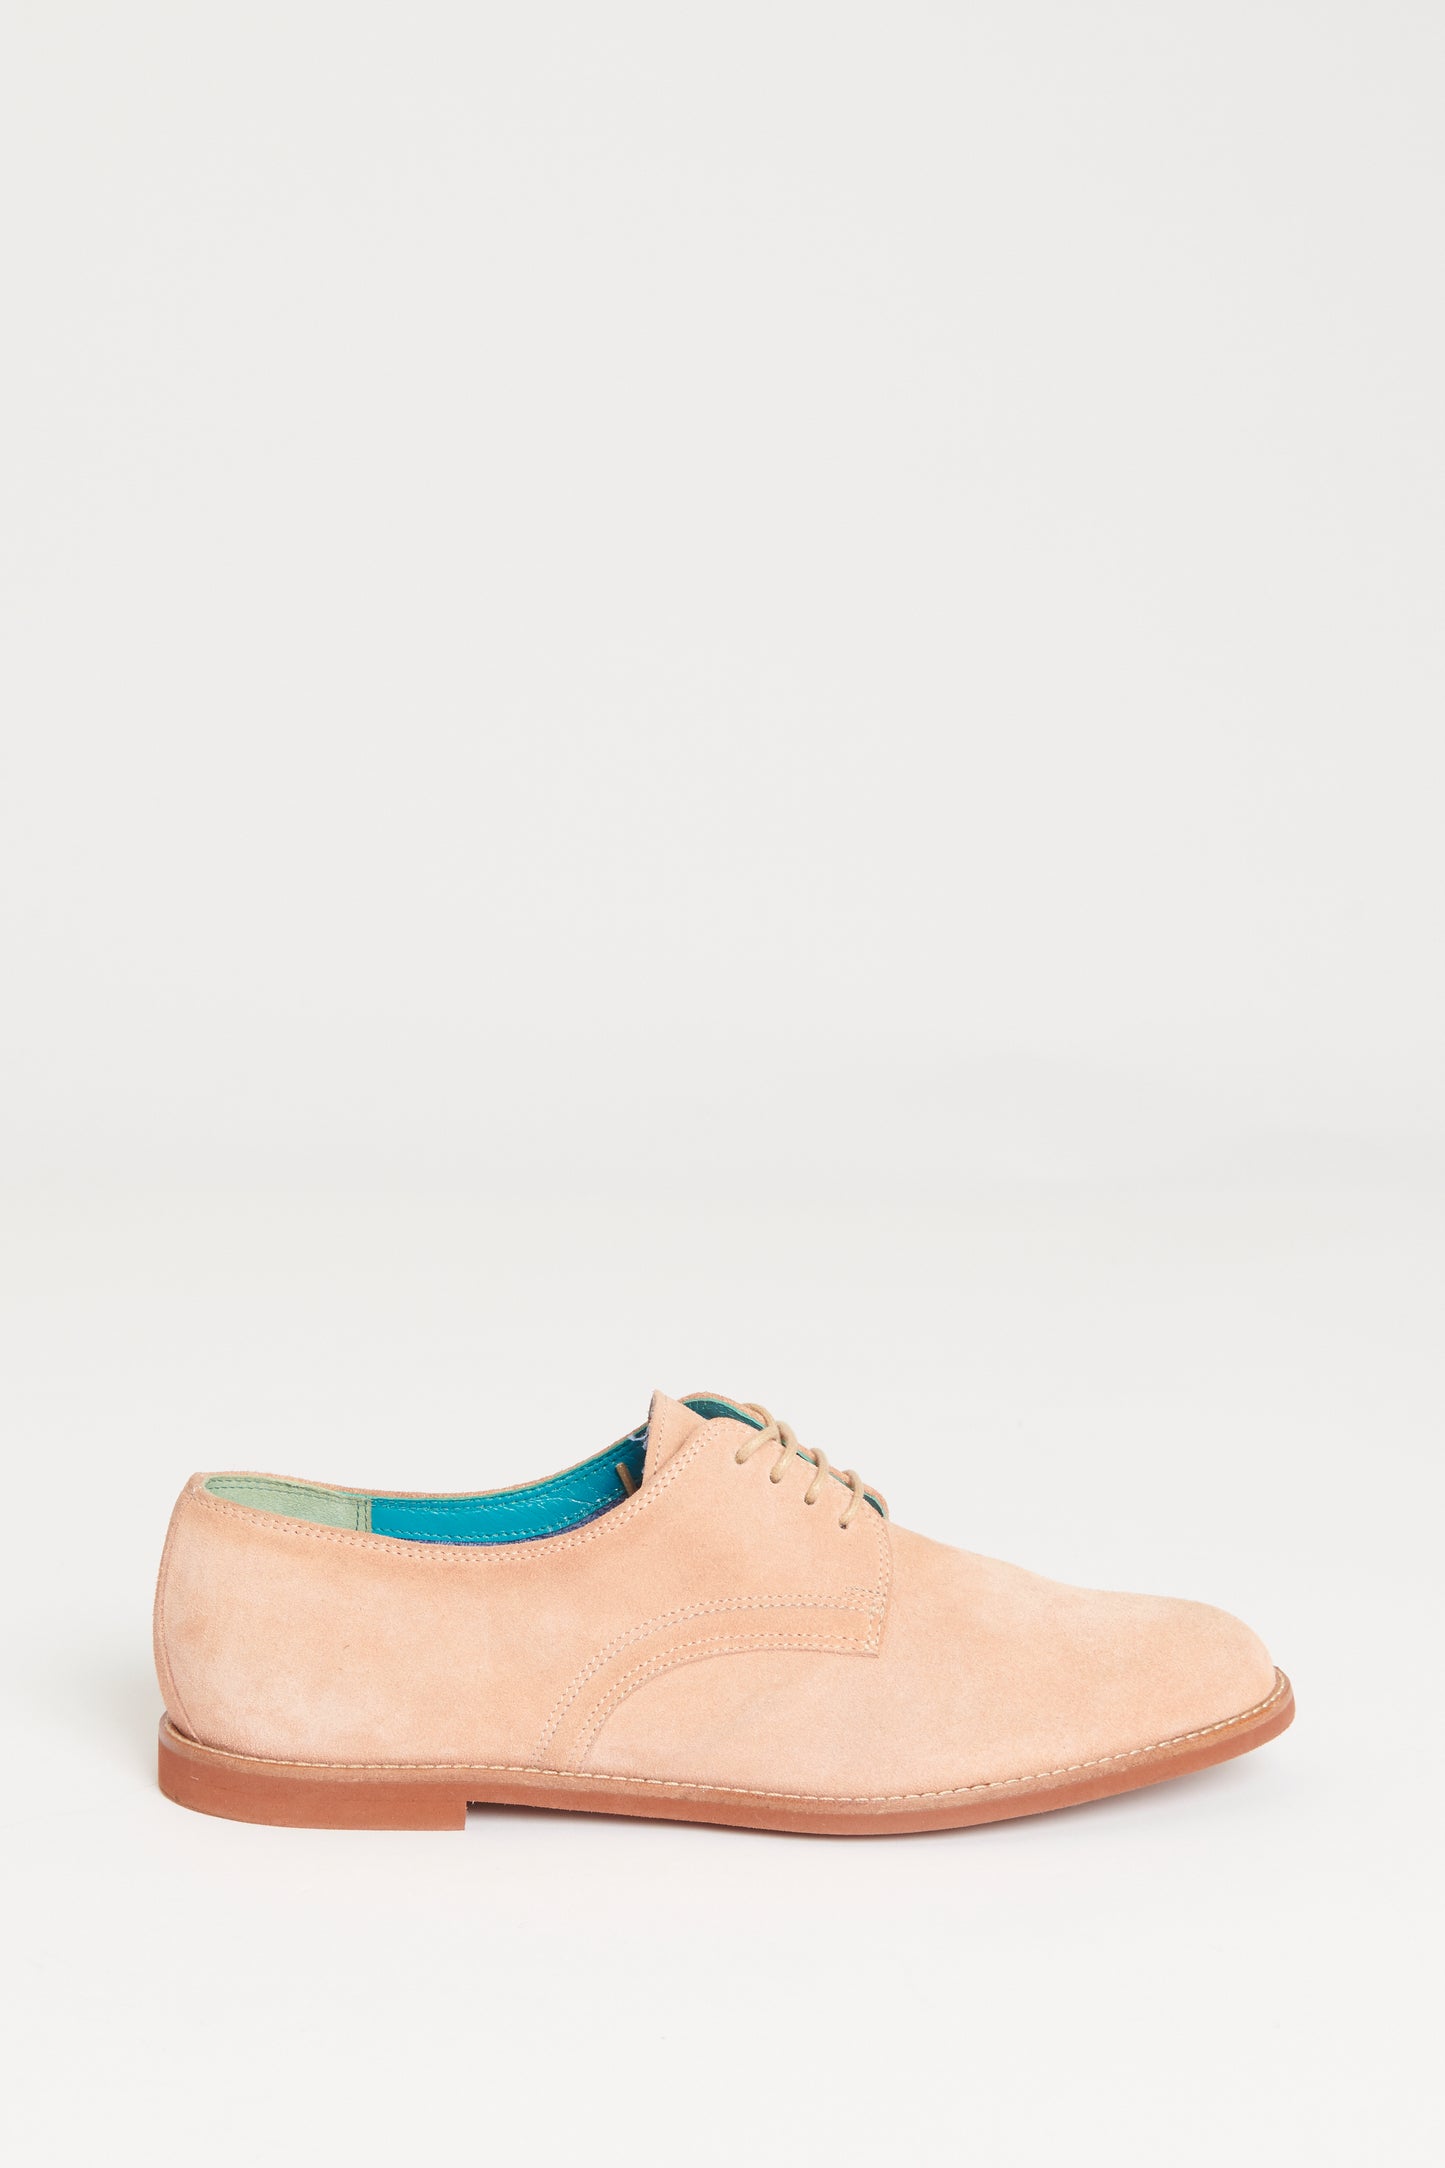 Salmon Pink Suede Preowned Bukka Joe Lace Up Oxfords